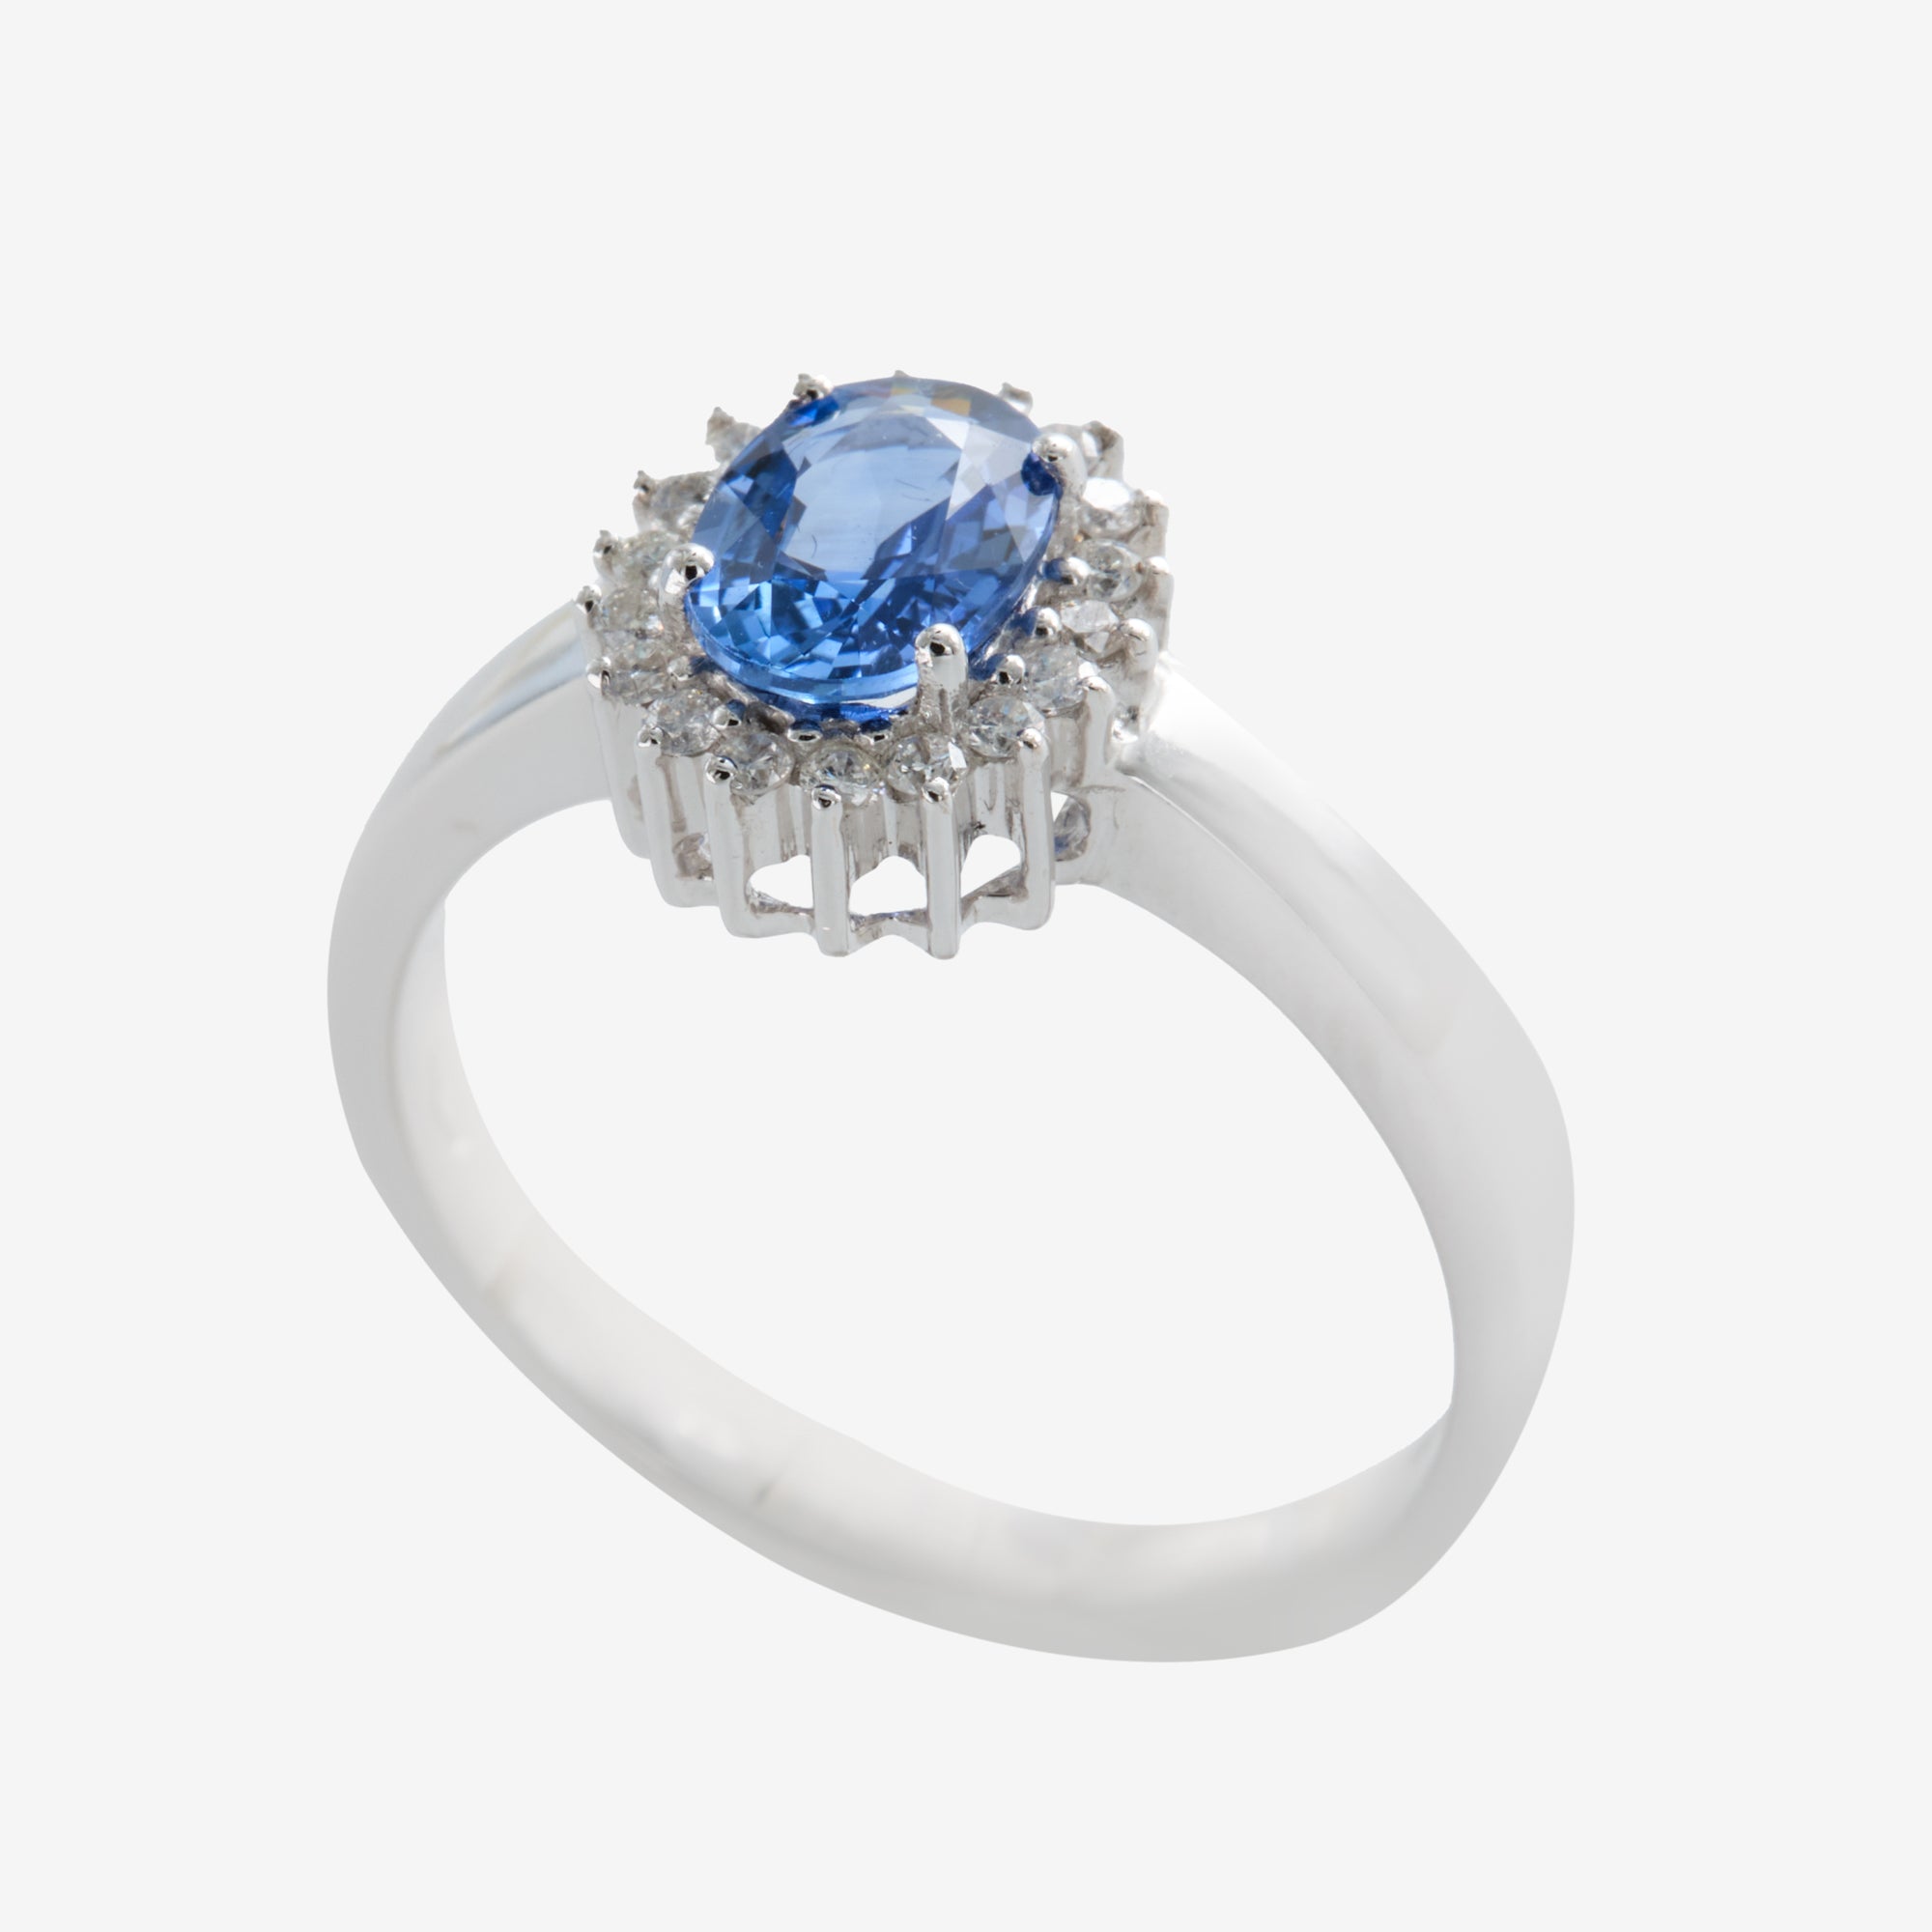 ASYA RING WITH SAPPHIRE AND DIAMONDS